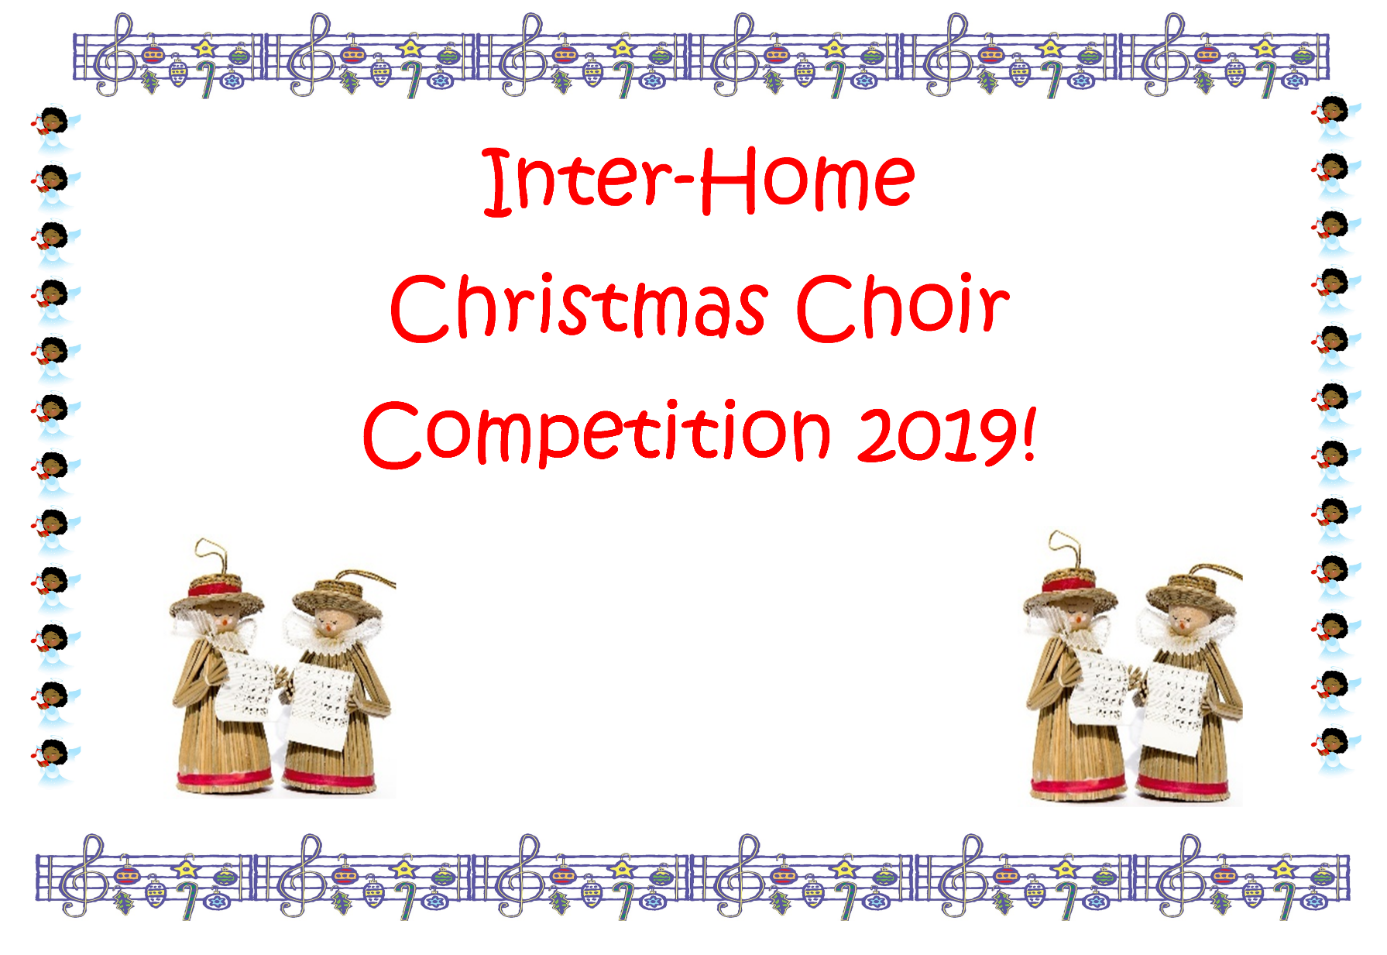 Amica Care Trust Choir Competition Image